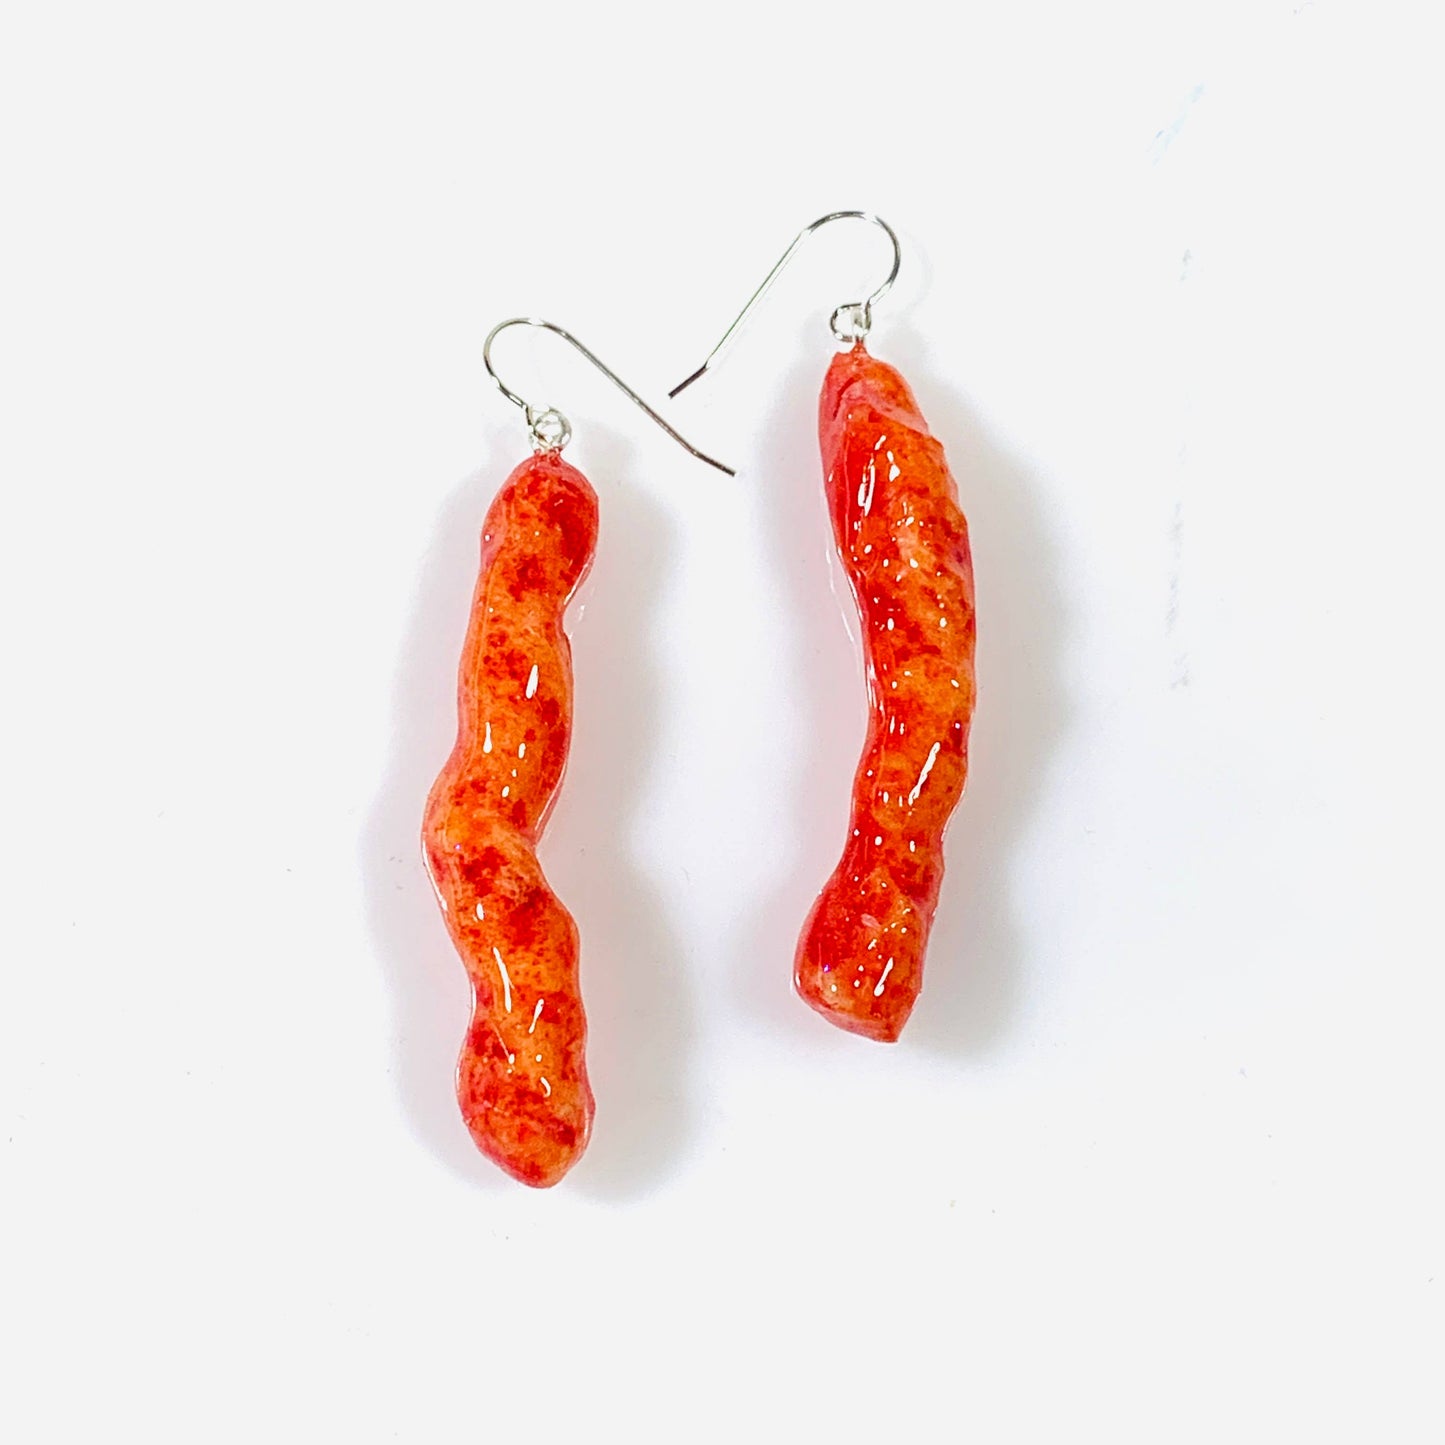 Pair of hot cheetos coated in resin and  turned into earrings